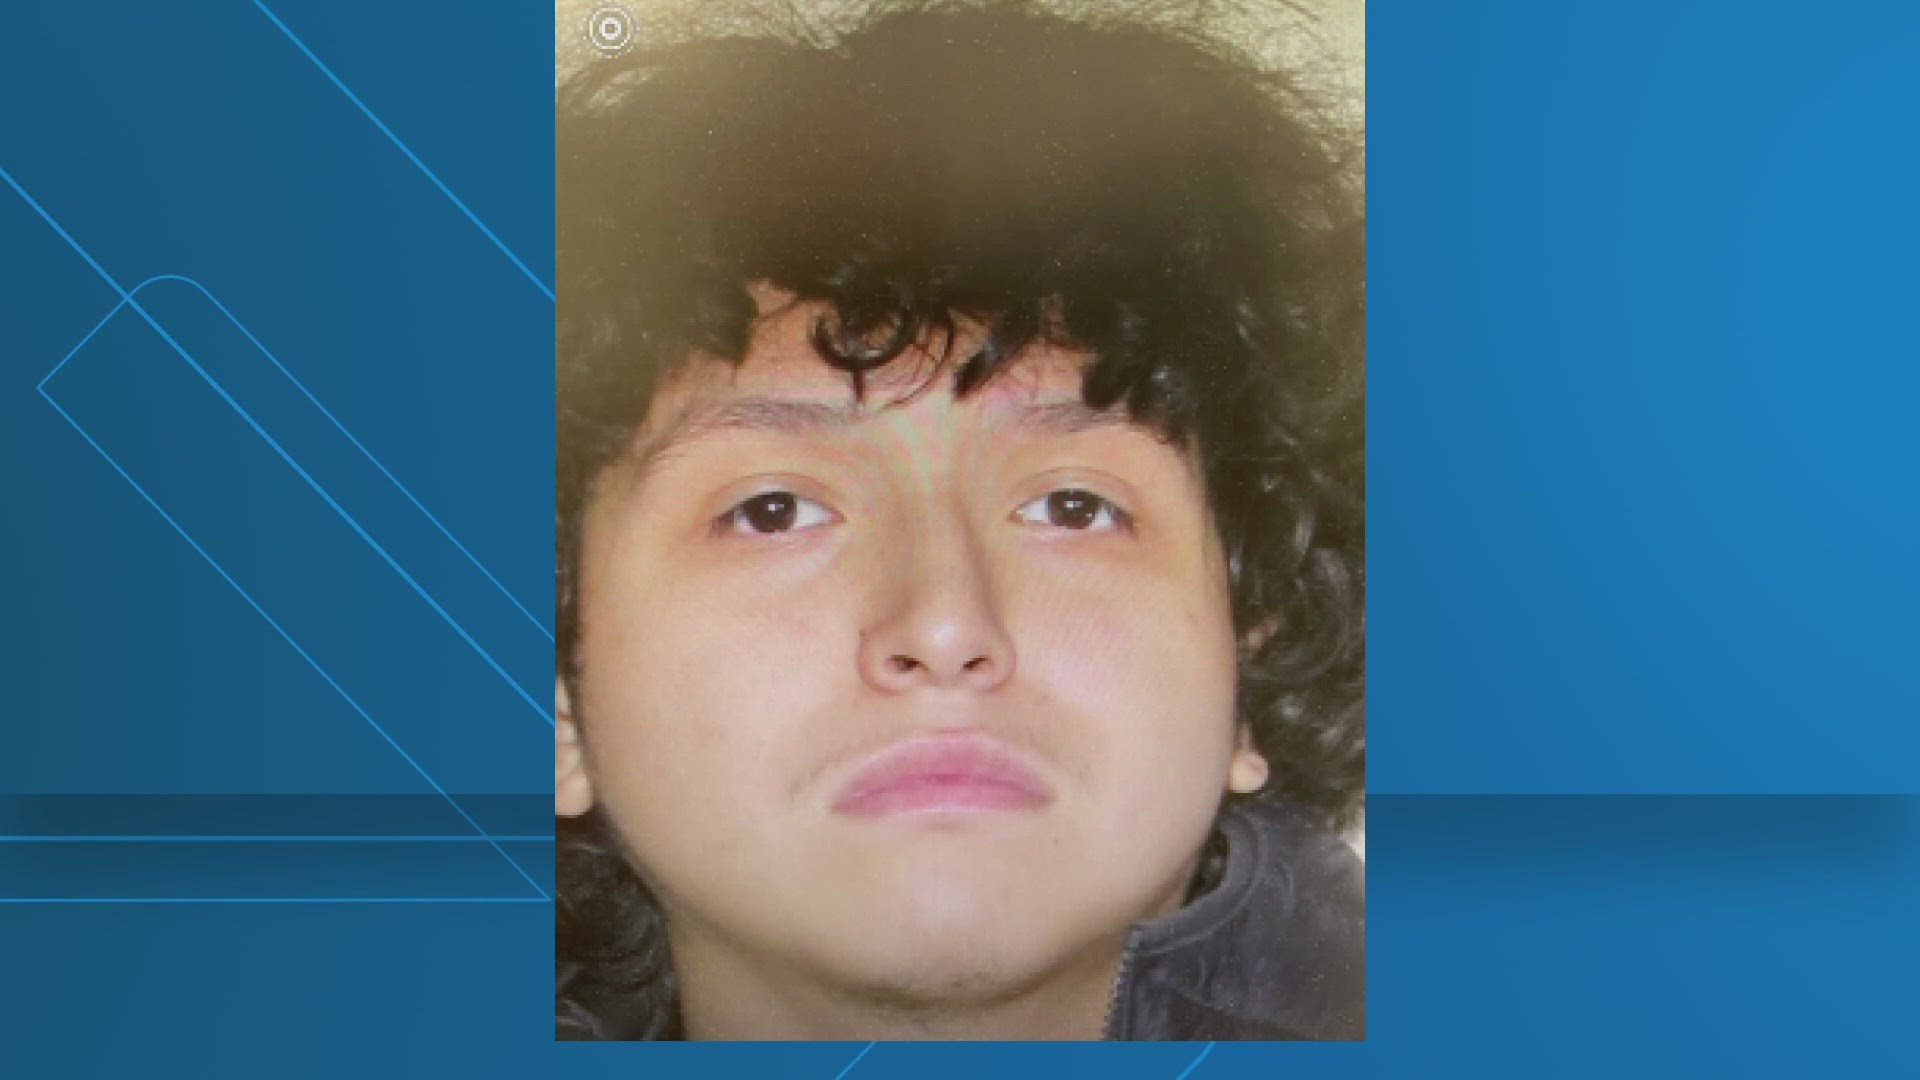 Authorities say the 18-year-old man turned himself in to police.